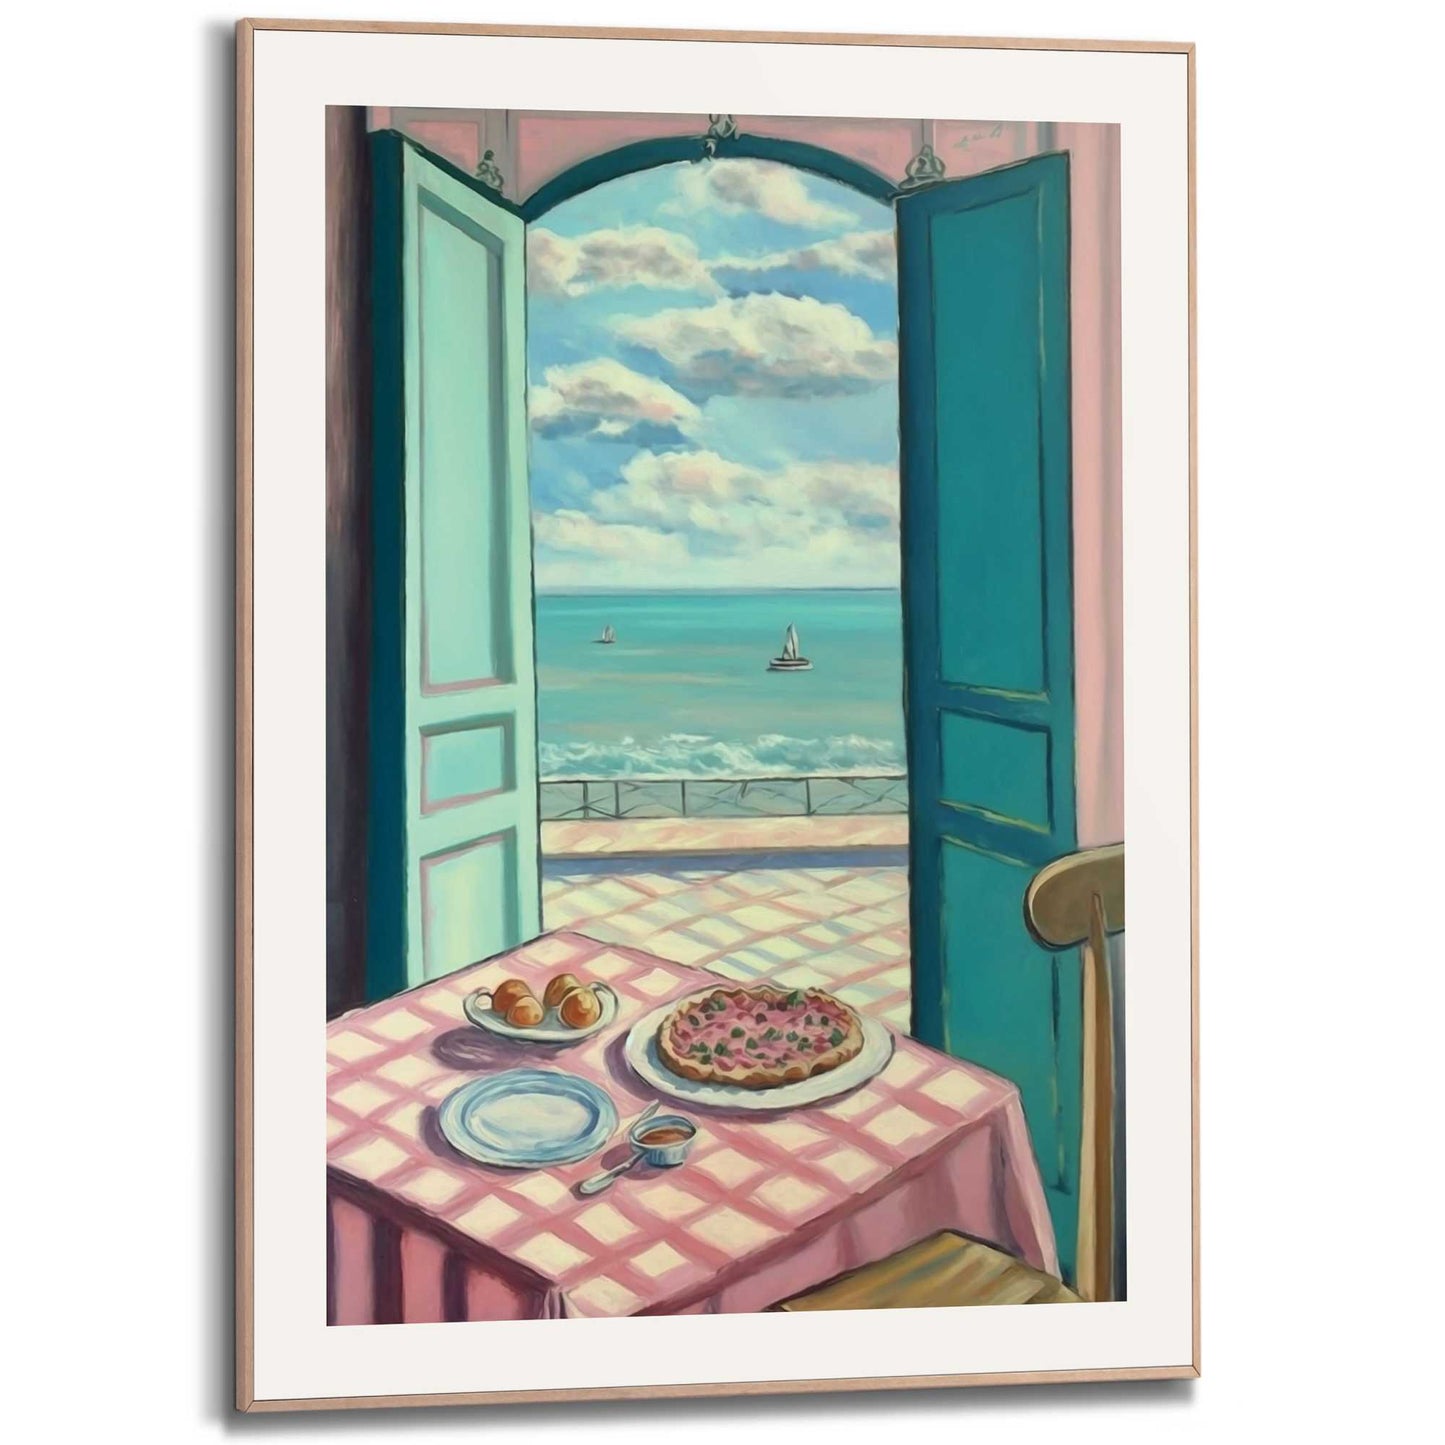 Framed in Wood Holiday Balcony View 70x50